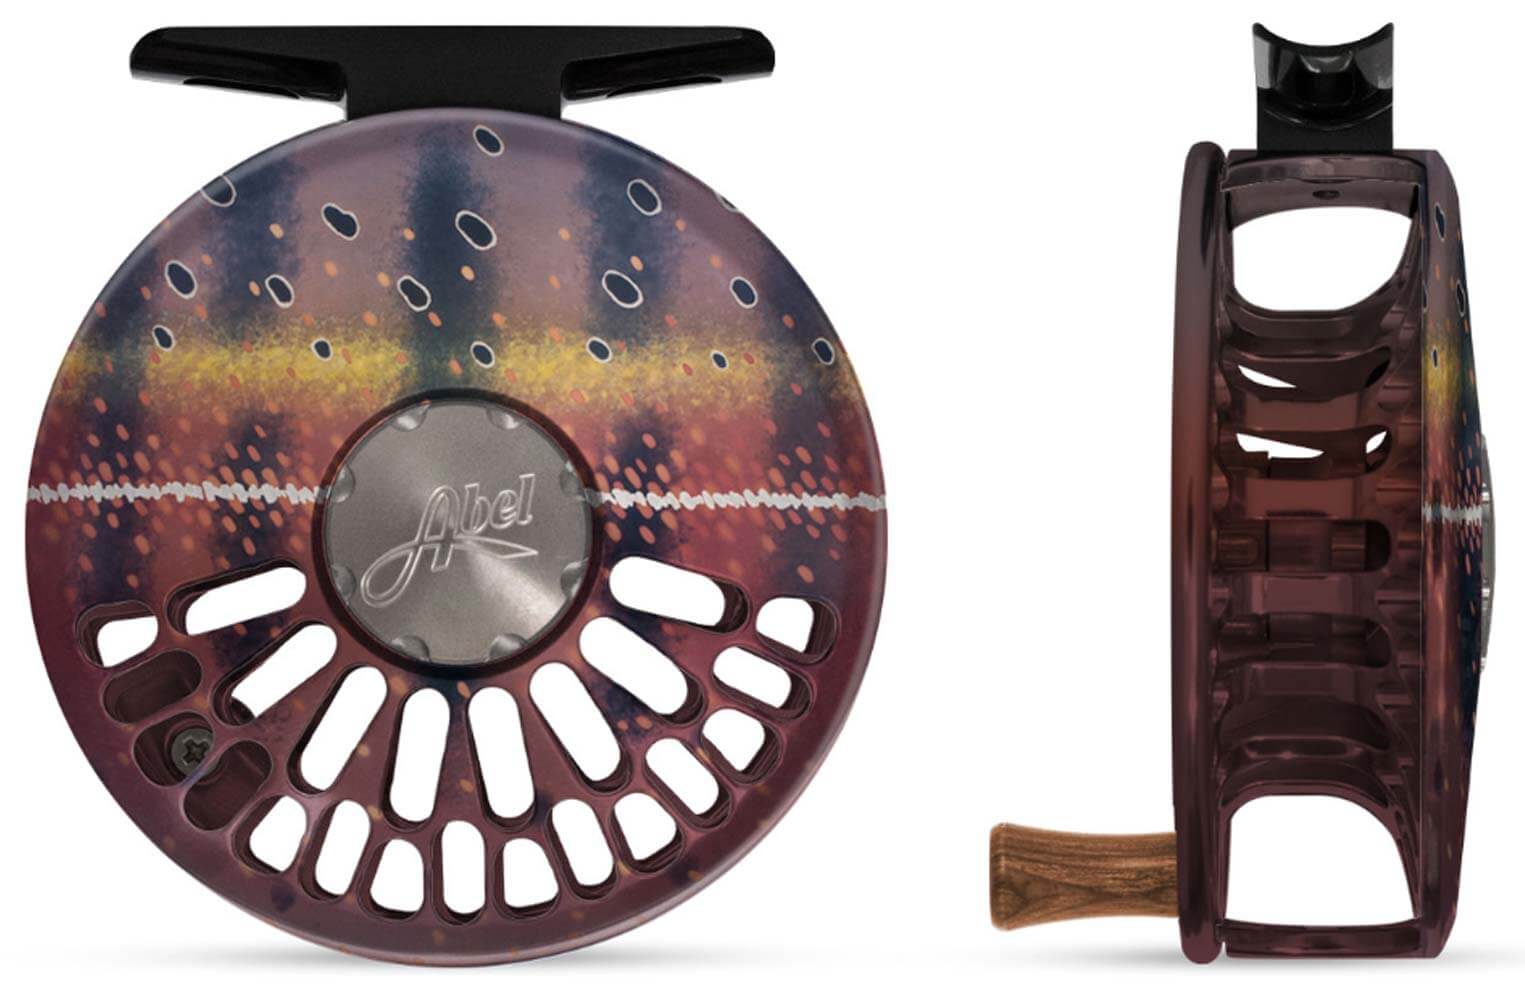 Abel TR 2/3 Fly Reel Native Brook Trout